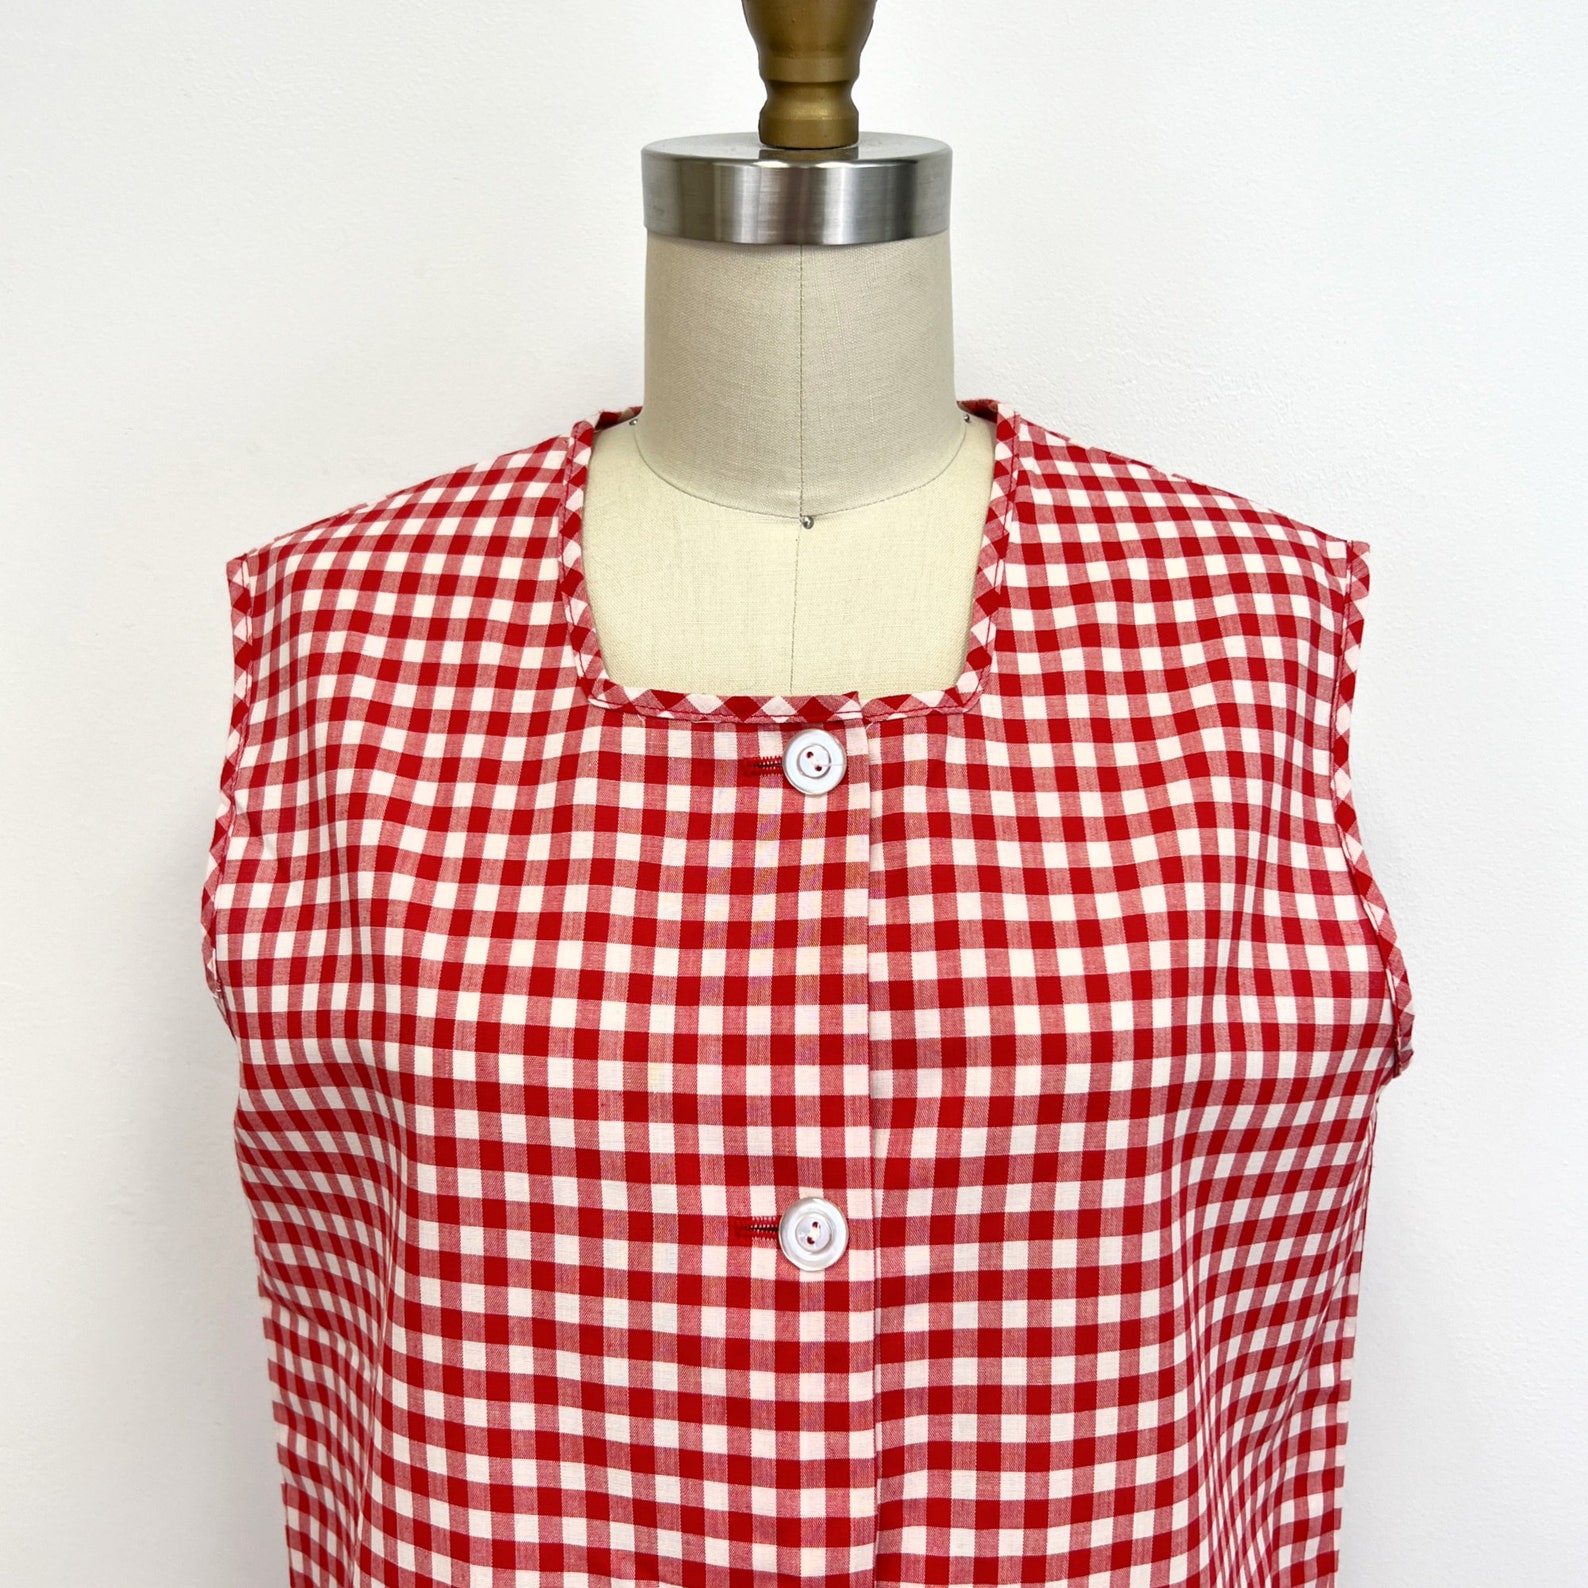 Vintage Gingham Smock Top 1970s Red and White Sleeveless Shirt With ...